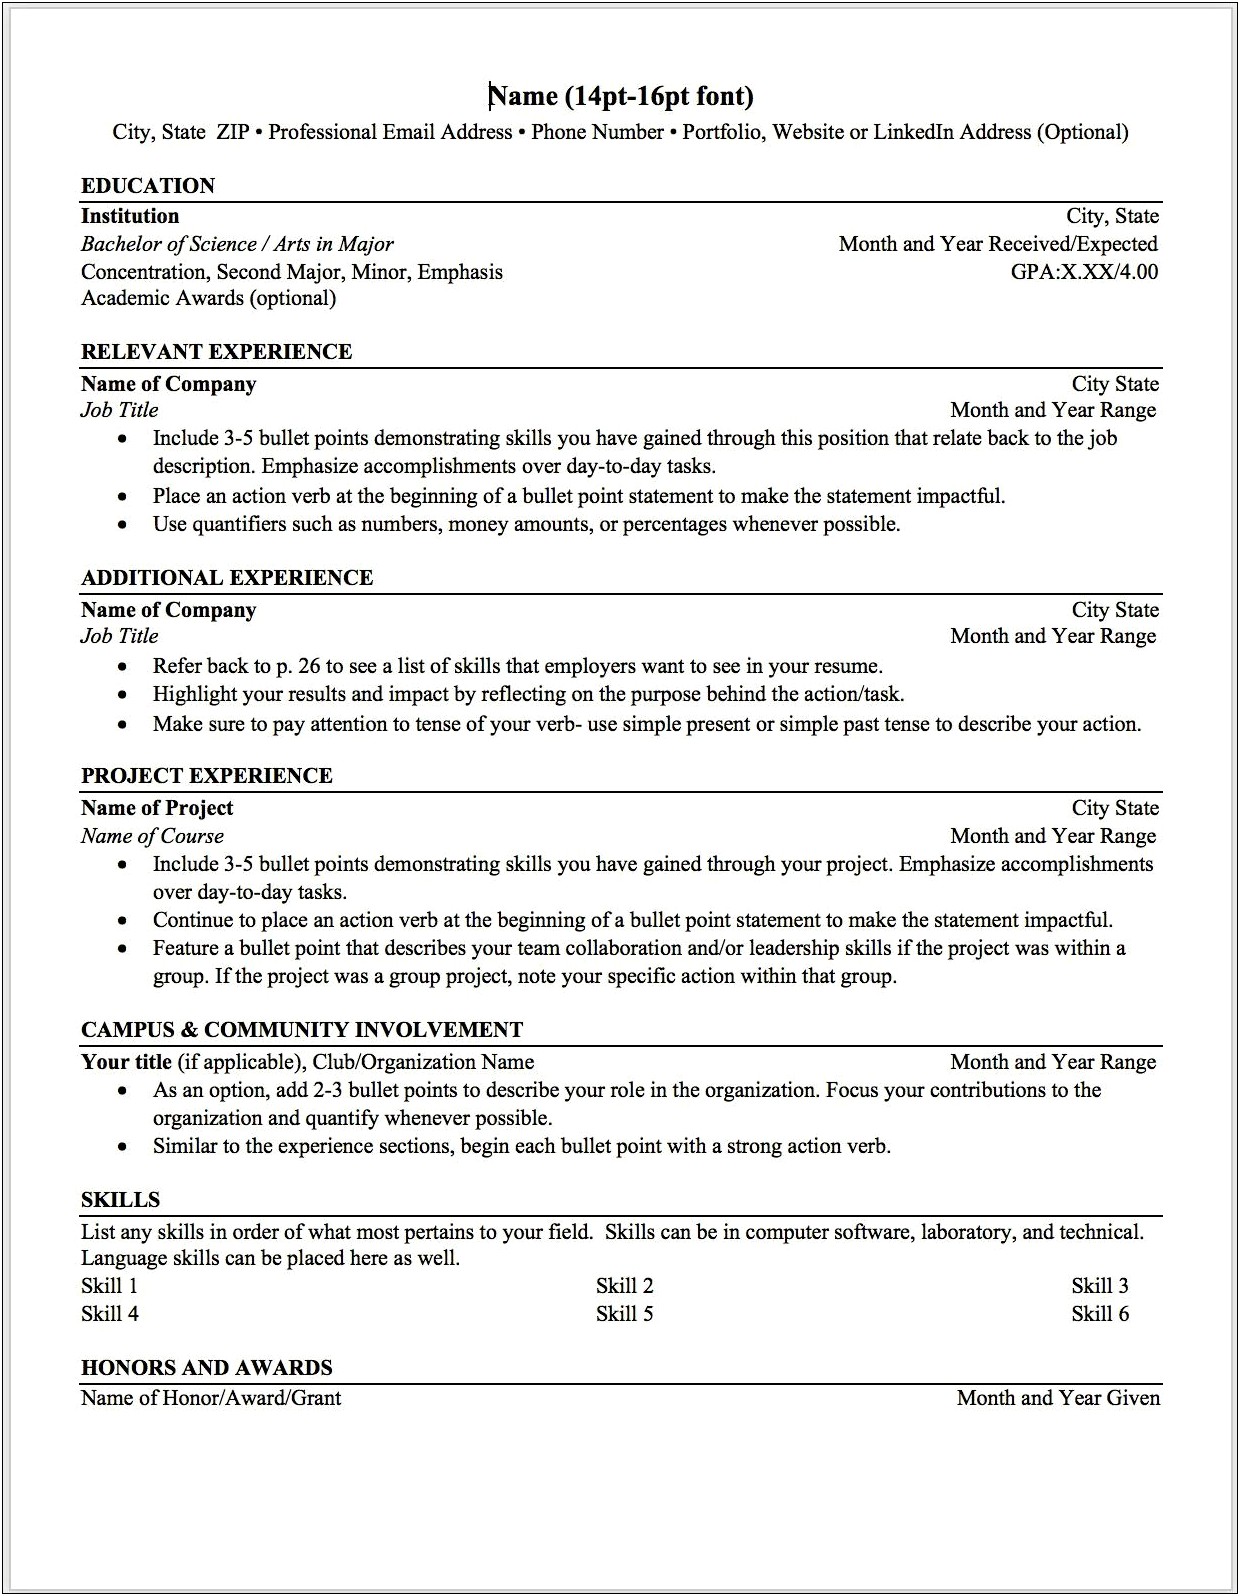 Important Computer Based Skills For Resume